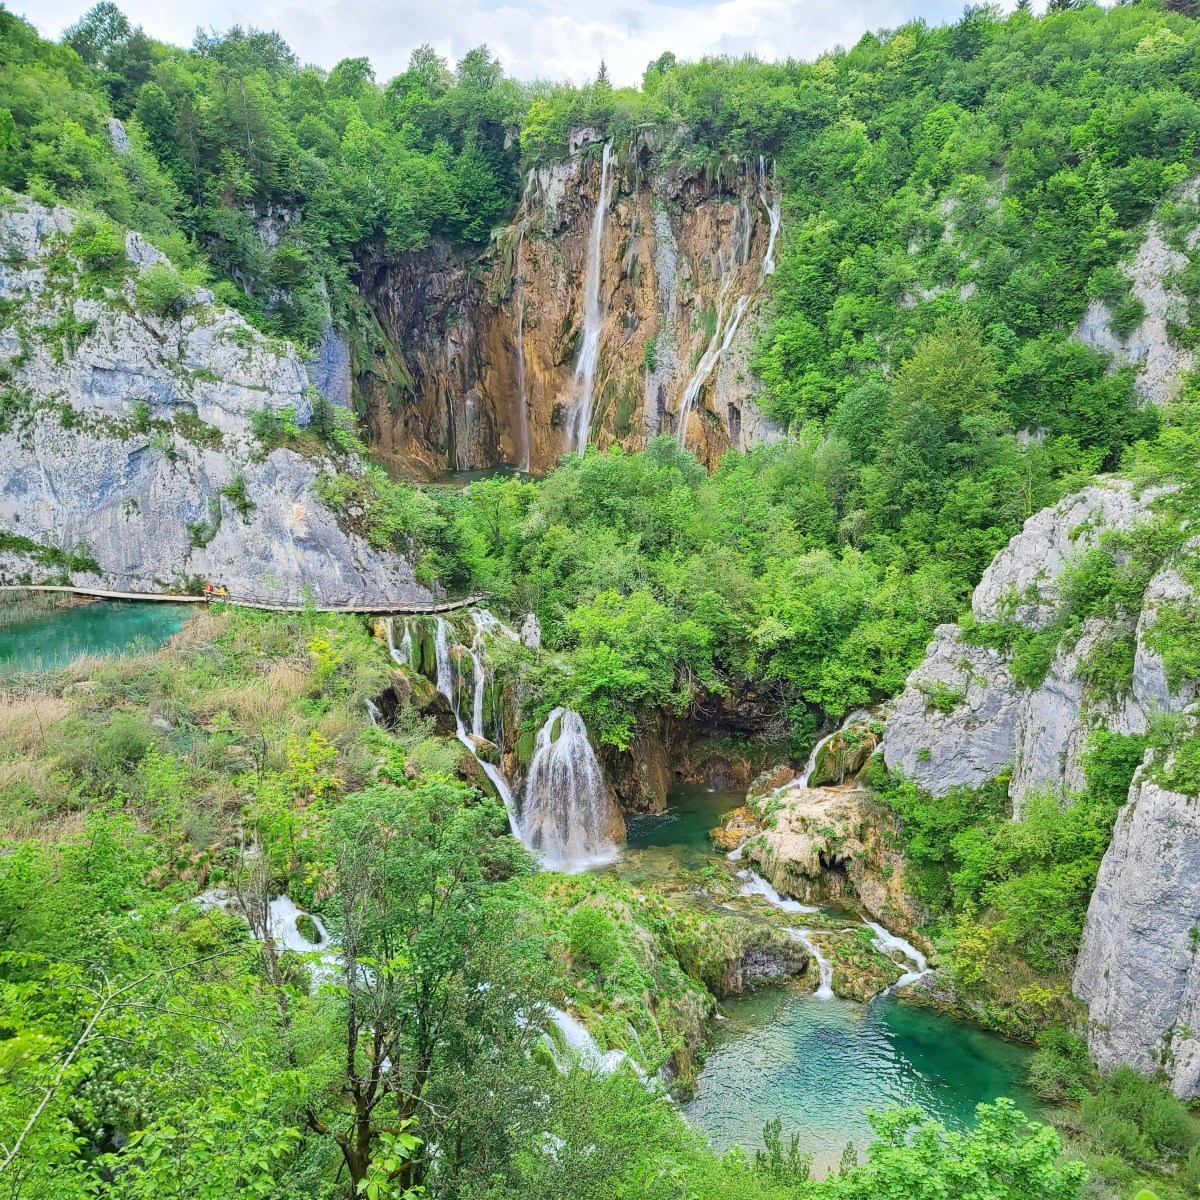 Visiting Plitvice Lakes National Park – The Ultimate Guide